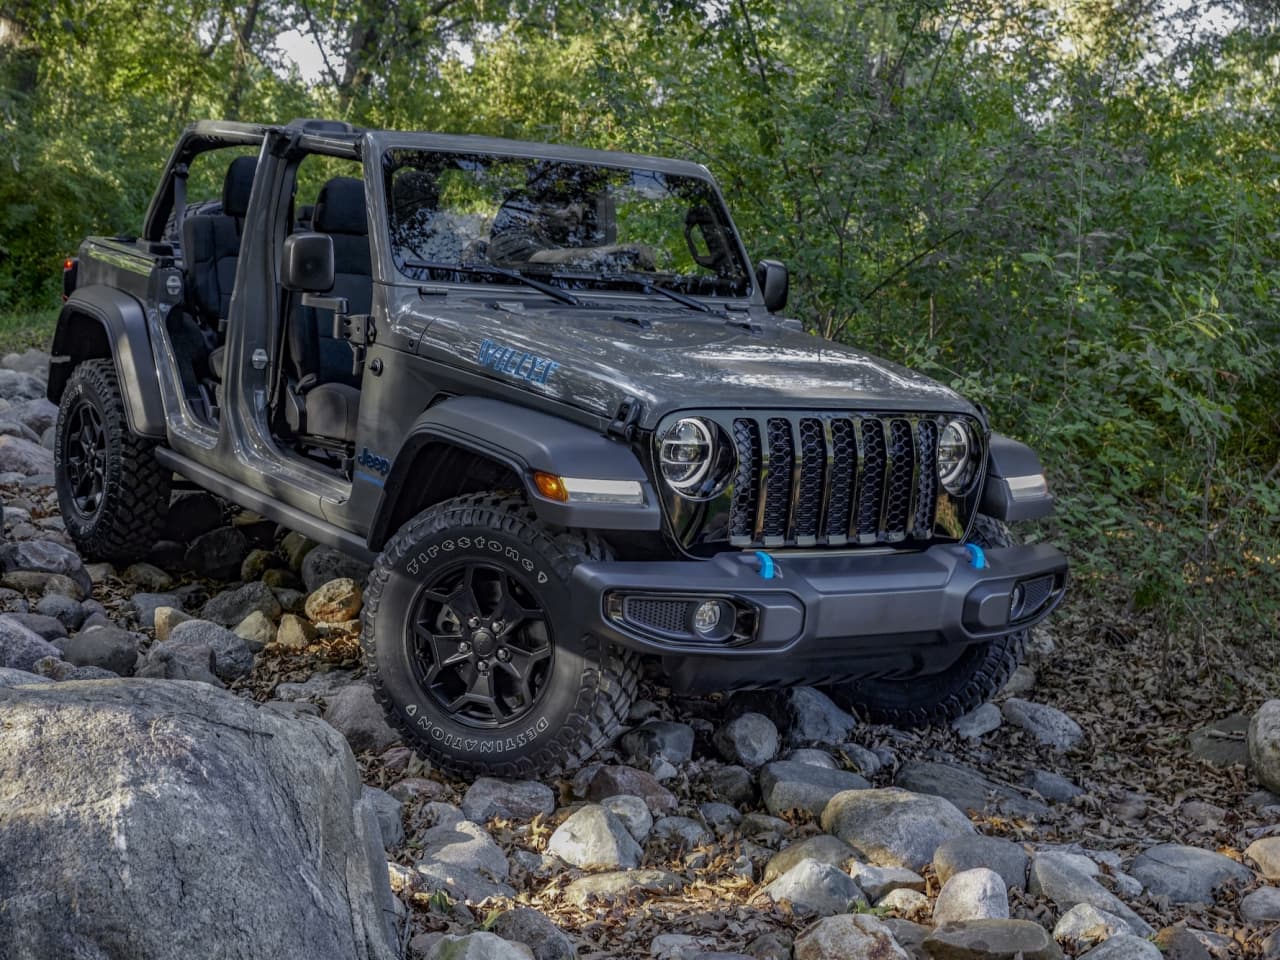 What it's like to drive the plug-in electric Jeep Wrangler 4xe